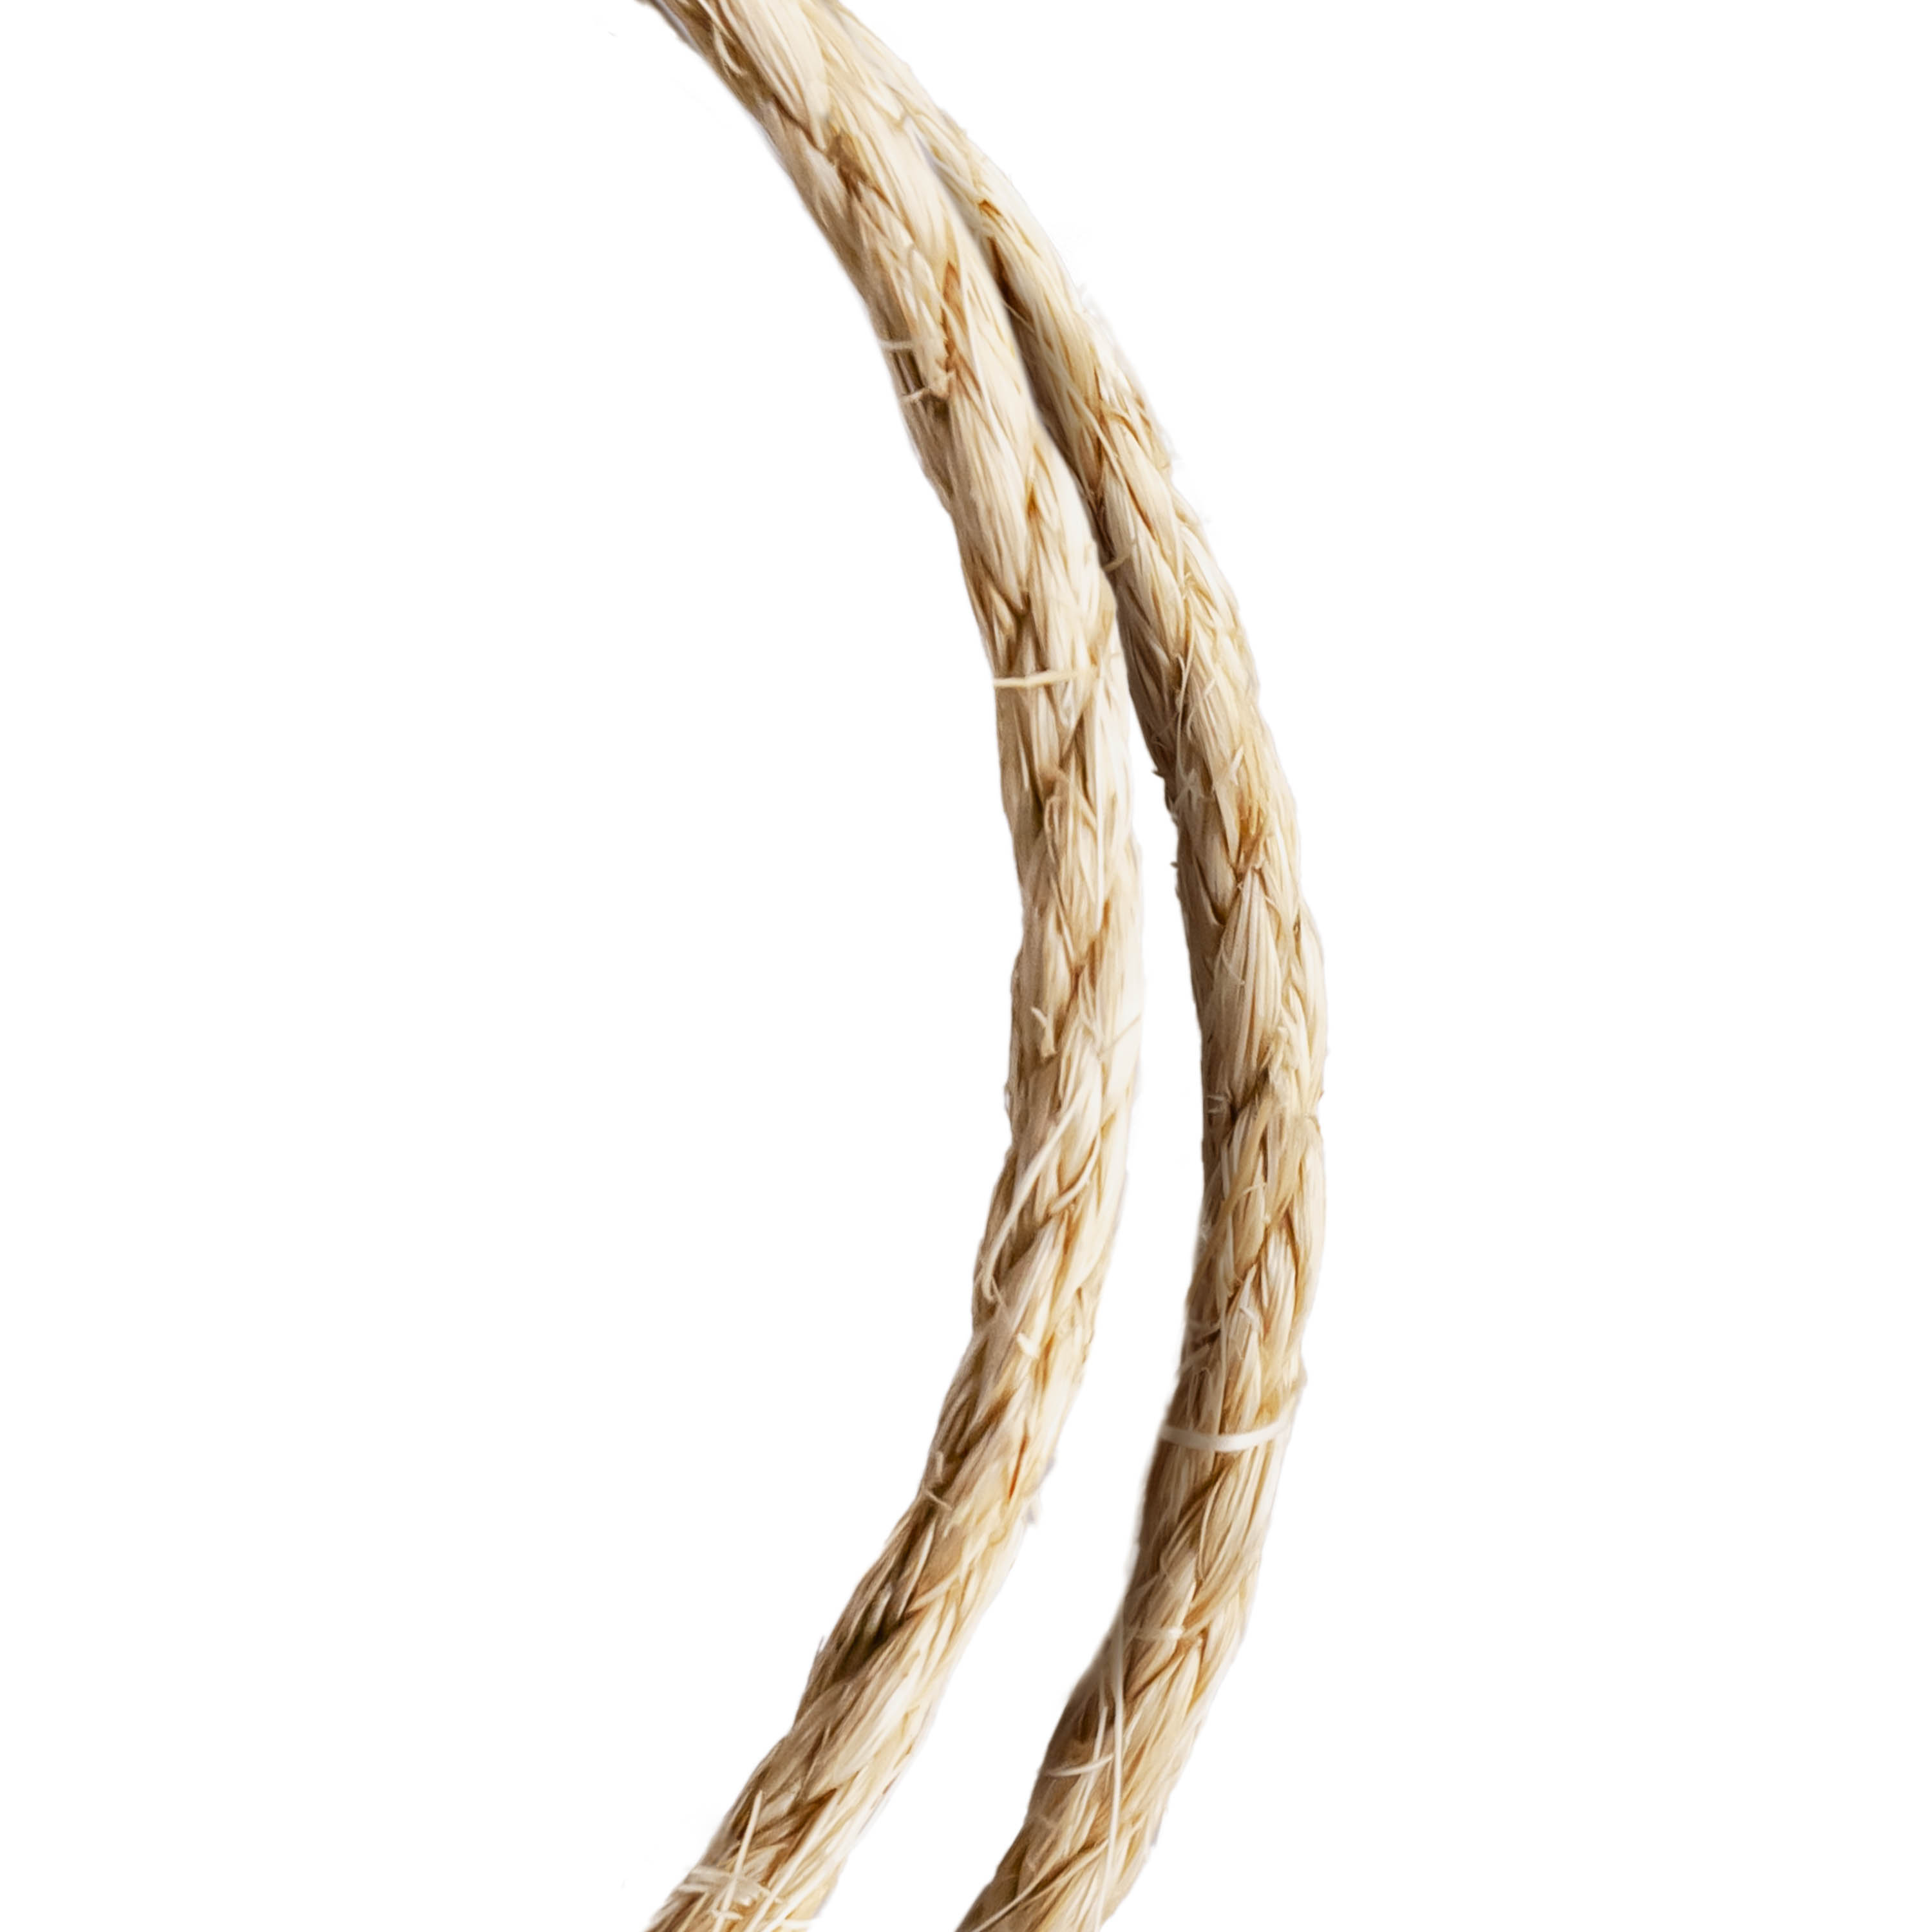 Hyper Tough 1/4" x 100' Sisal Twisted Rope, Beige - image 3 of 6